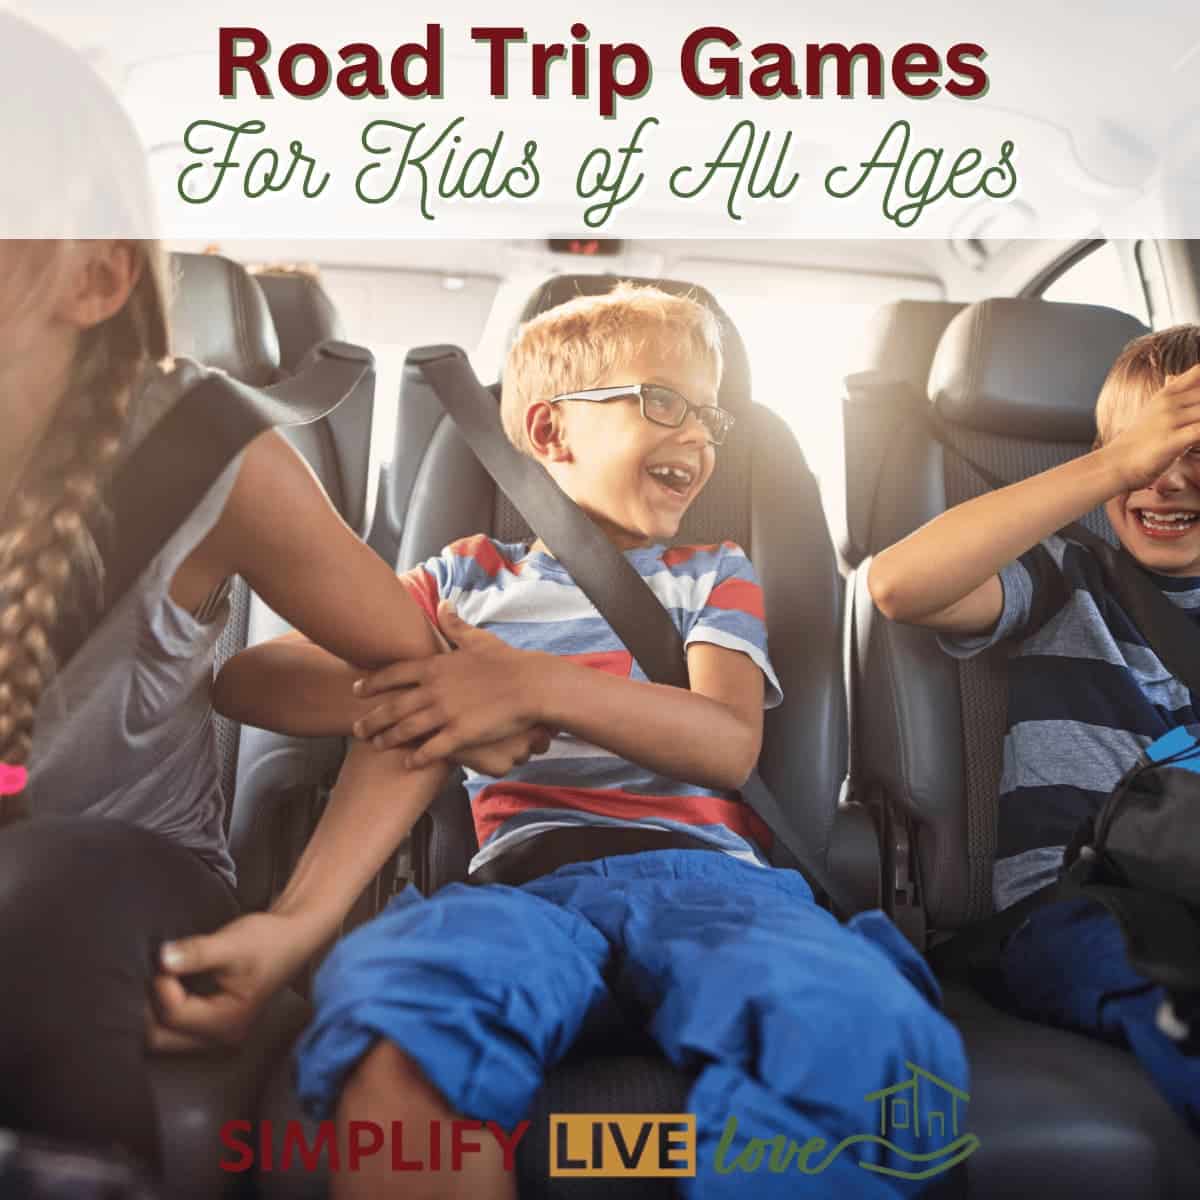 Road Trip Games and Activities for Kids - Frugal Fun For Boys and Girls